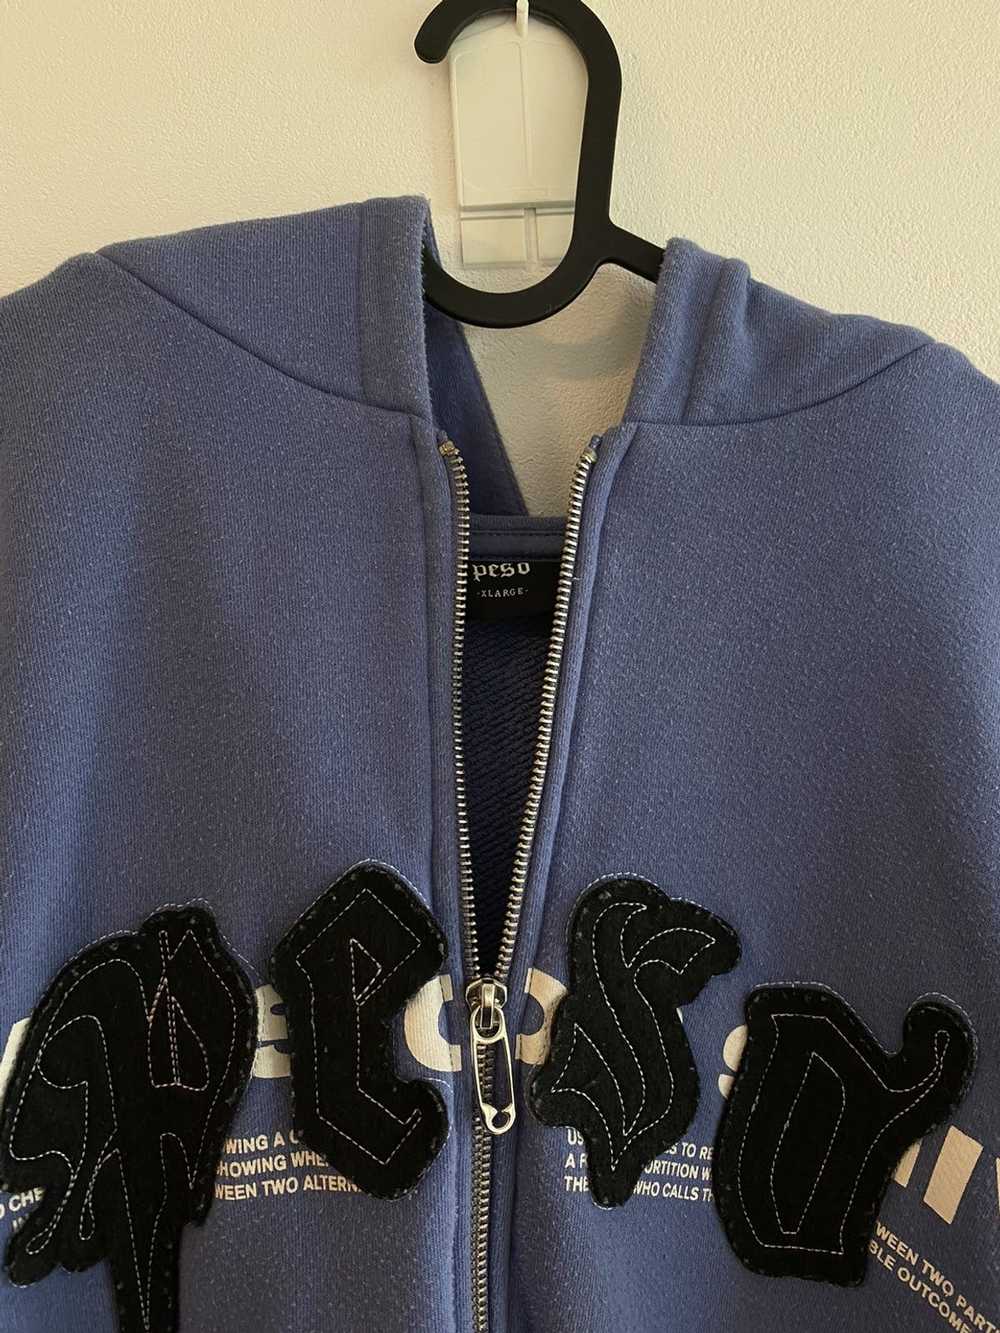 Peso Peso „heads or tails“ zip up - image 3